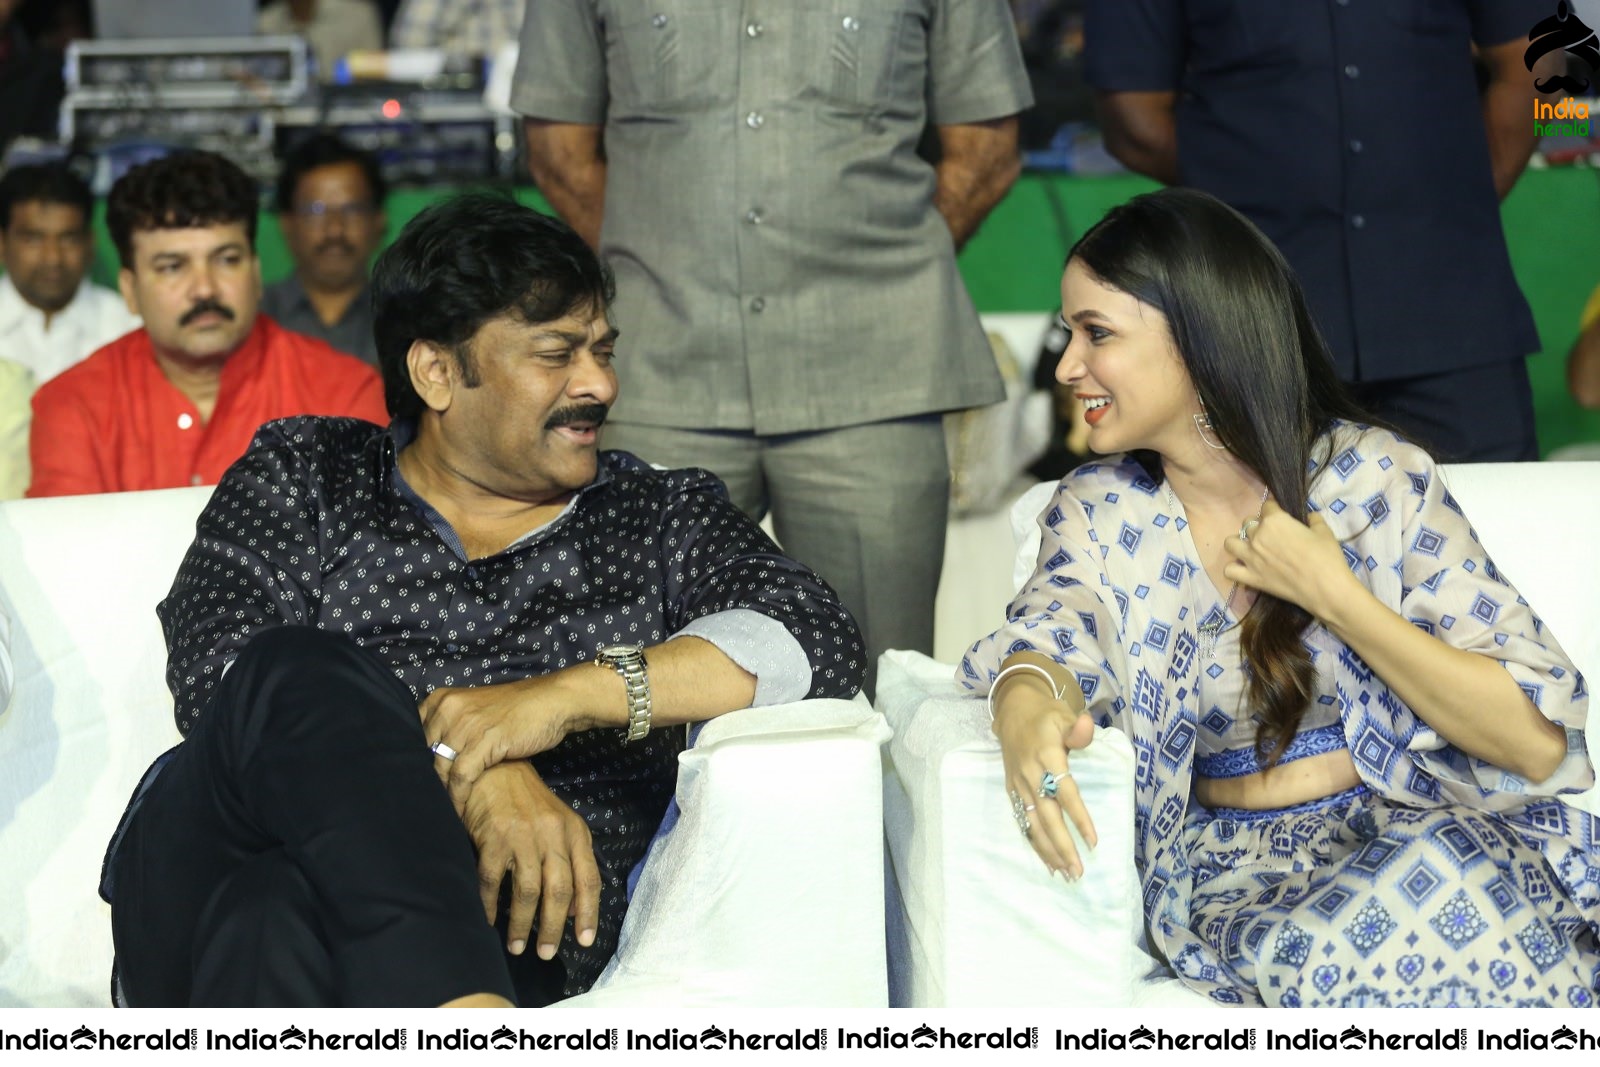 Actor Chiranjeevi has a funny chat with Lavanya Tripathi Set 2